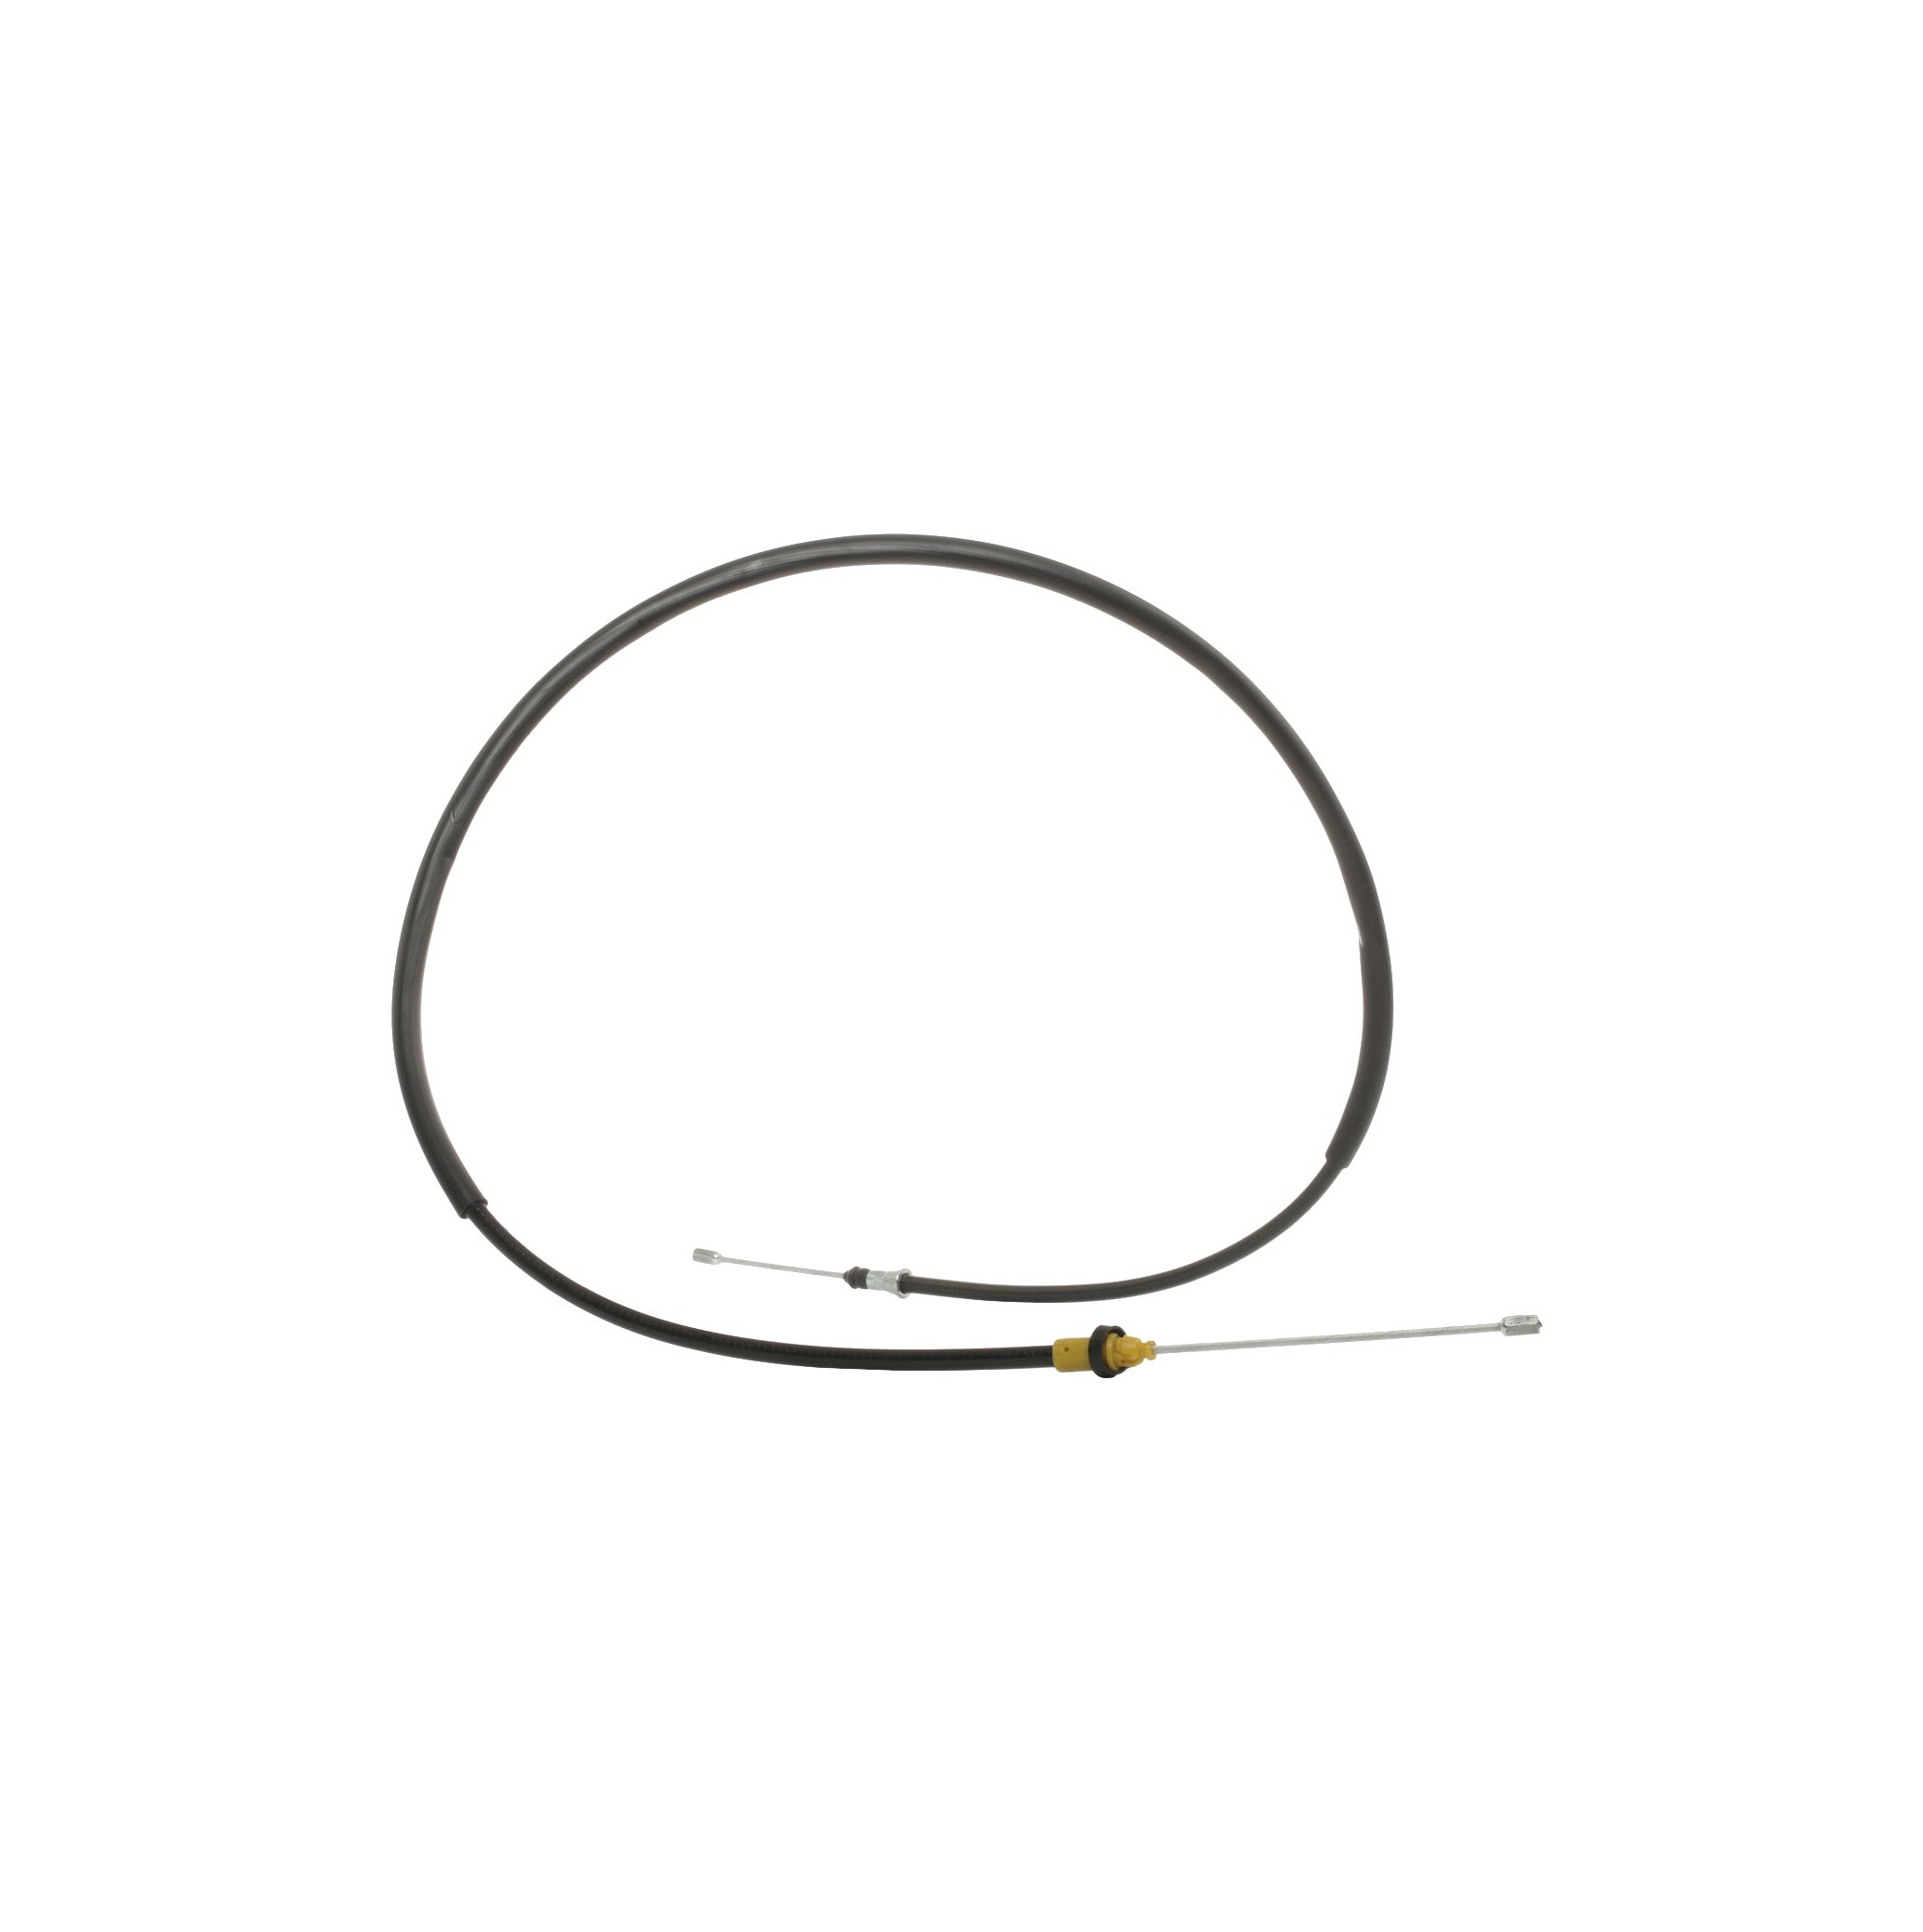 RIDEX 124C0078 Hand brake cable Left Rear, Right Rear, 1707, 1425mm, Disc Brake